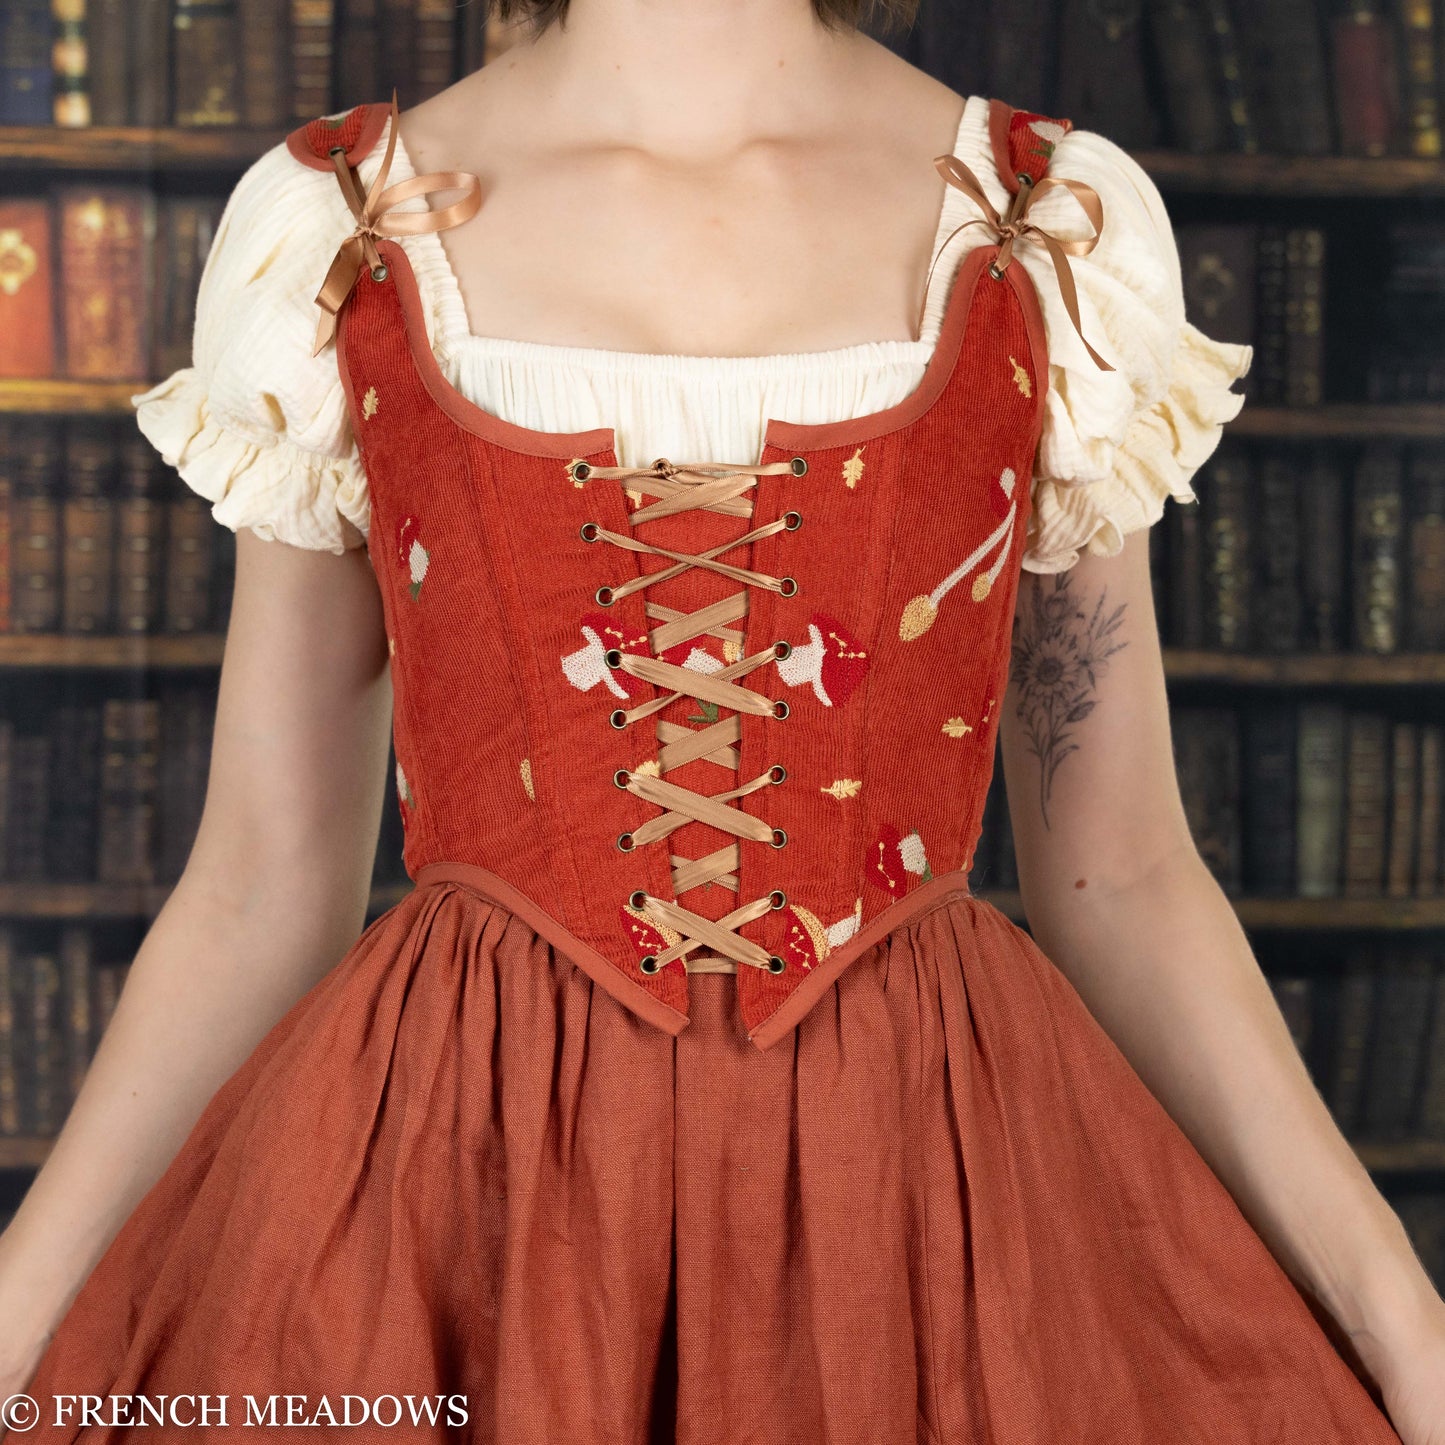 Medieval Renaissance Womens Sleeveless Orange Corset Dress With Fairy  Smocked Design Perfect For Parties And Events X0825 From  Official_888_store, $16.29